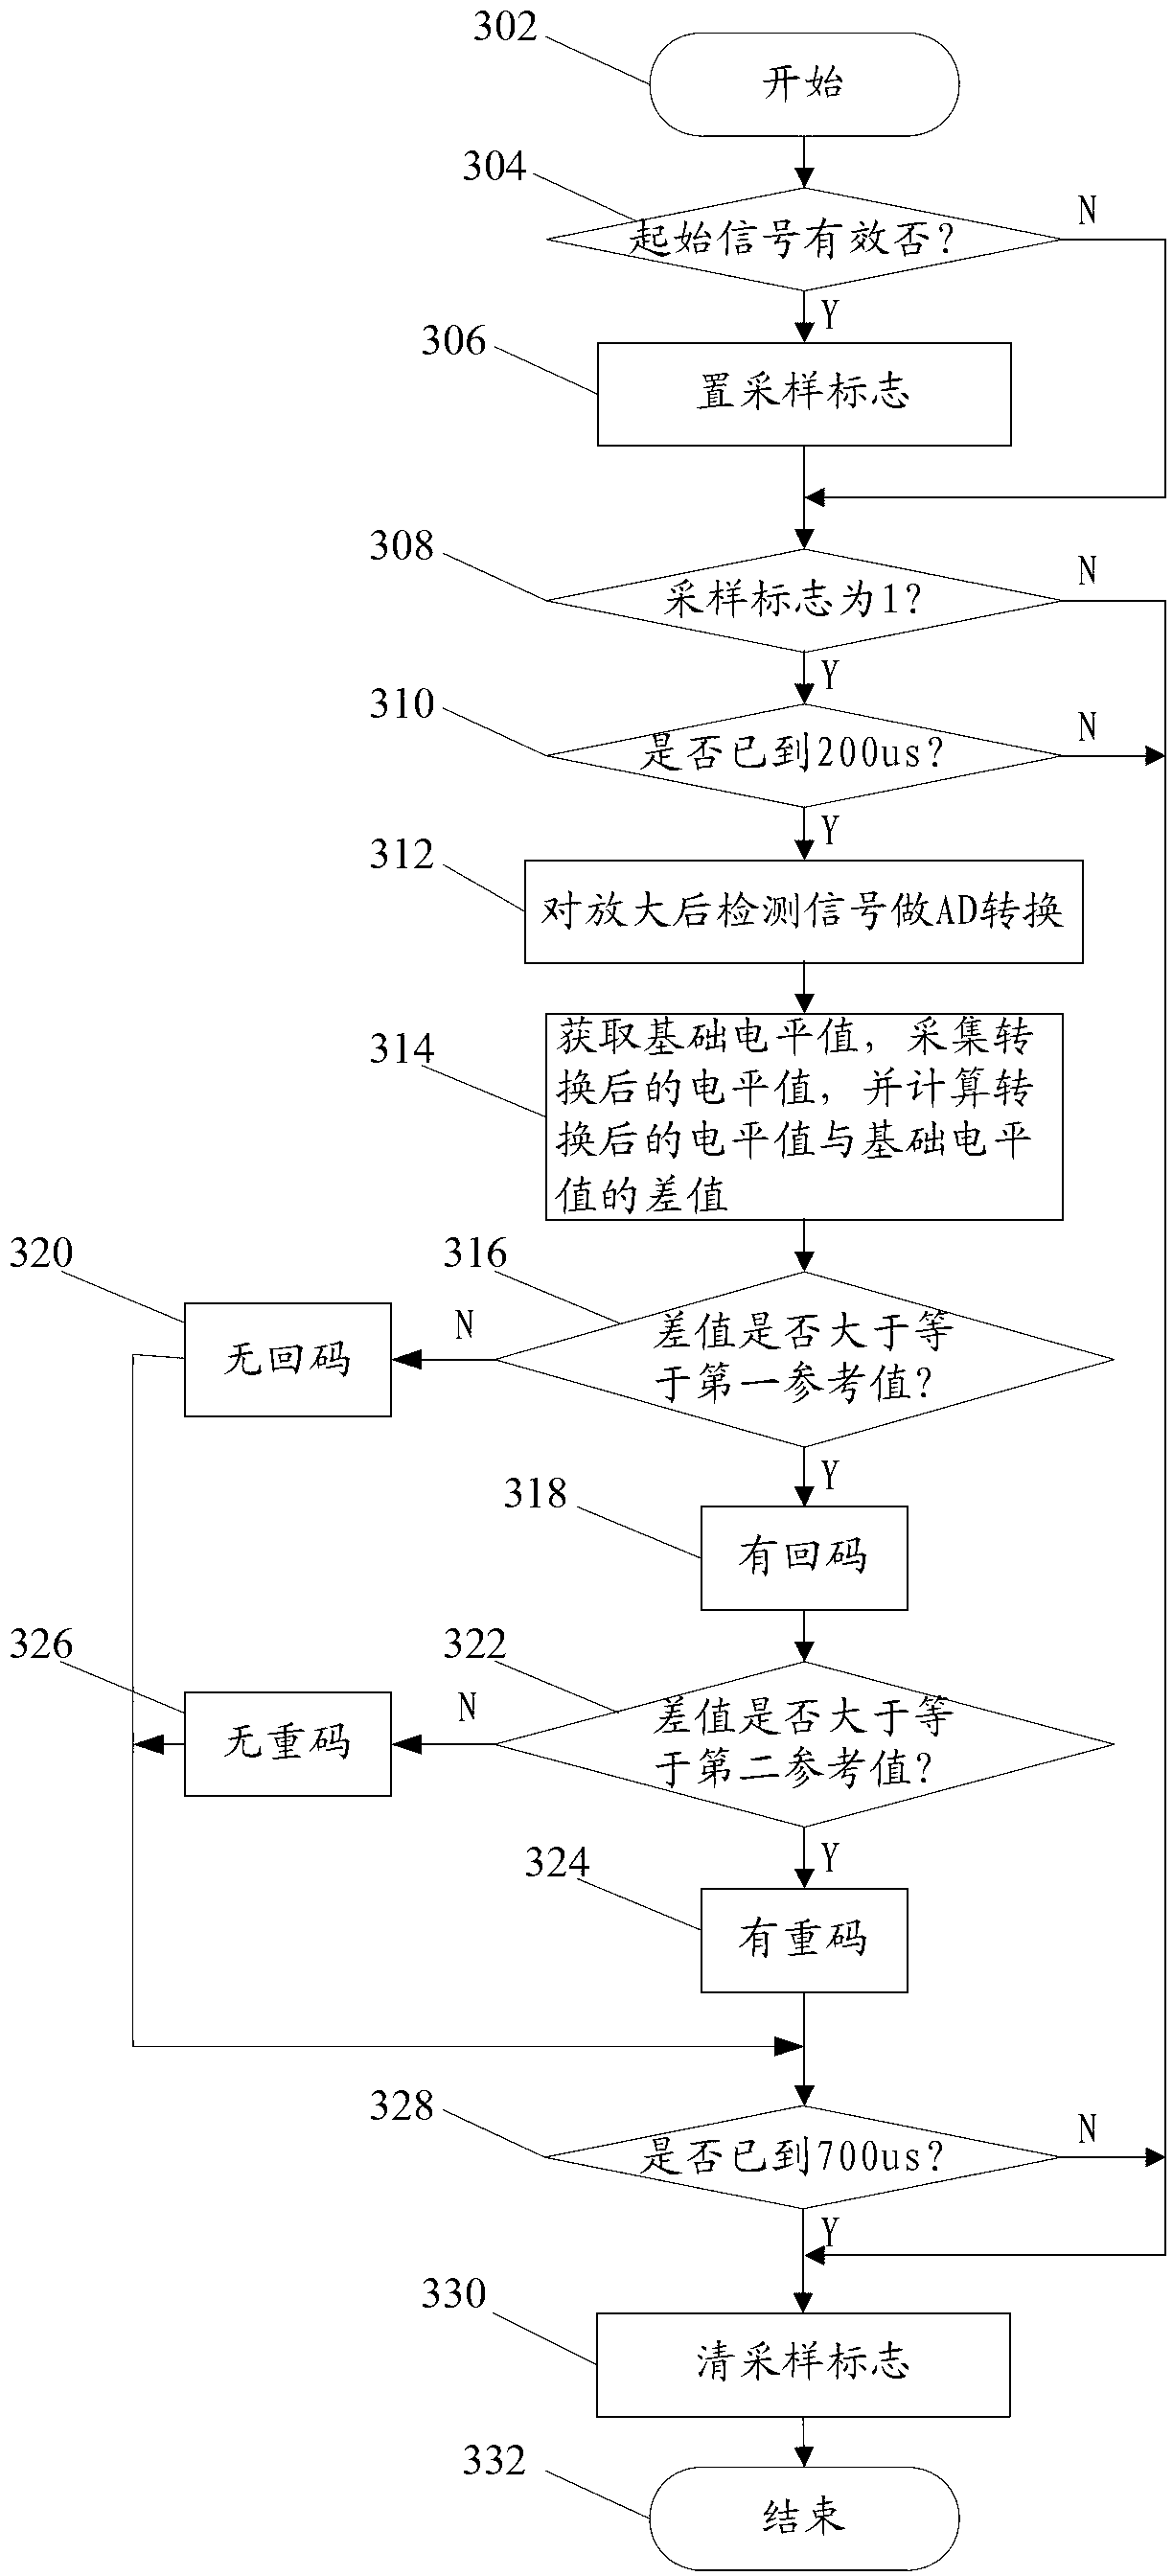 Return code judging method and driving circuit of current type industrial control bus